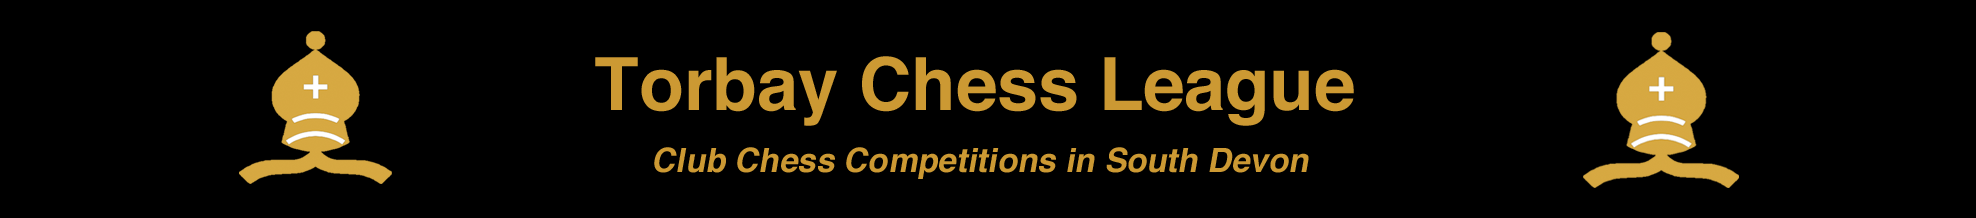 Torbay Chess League banner